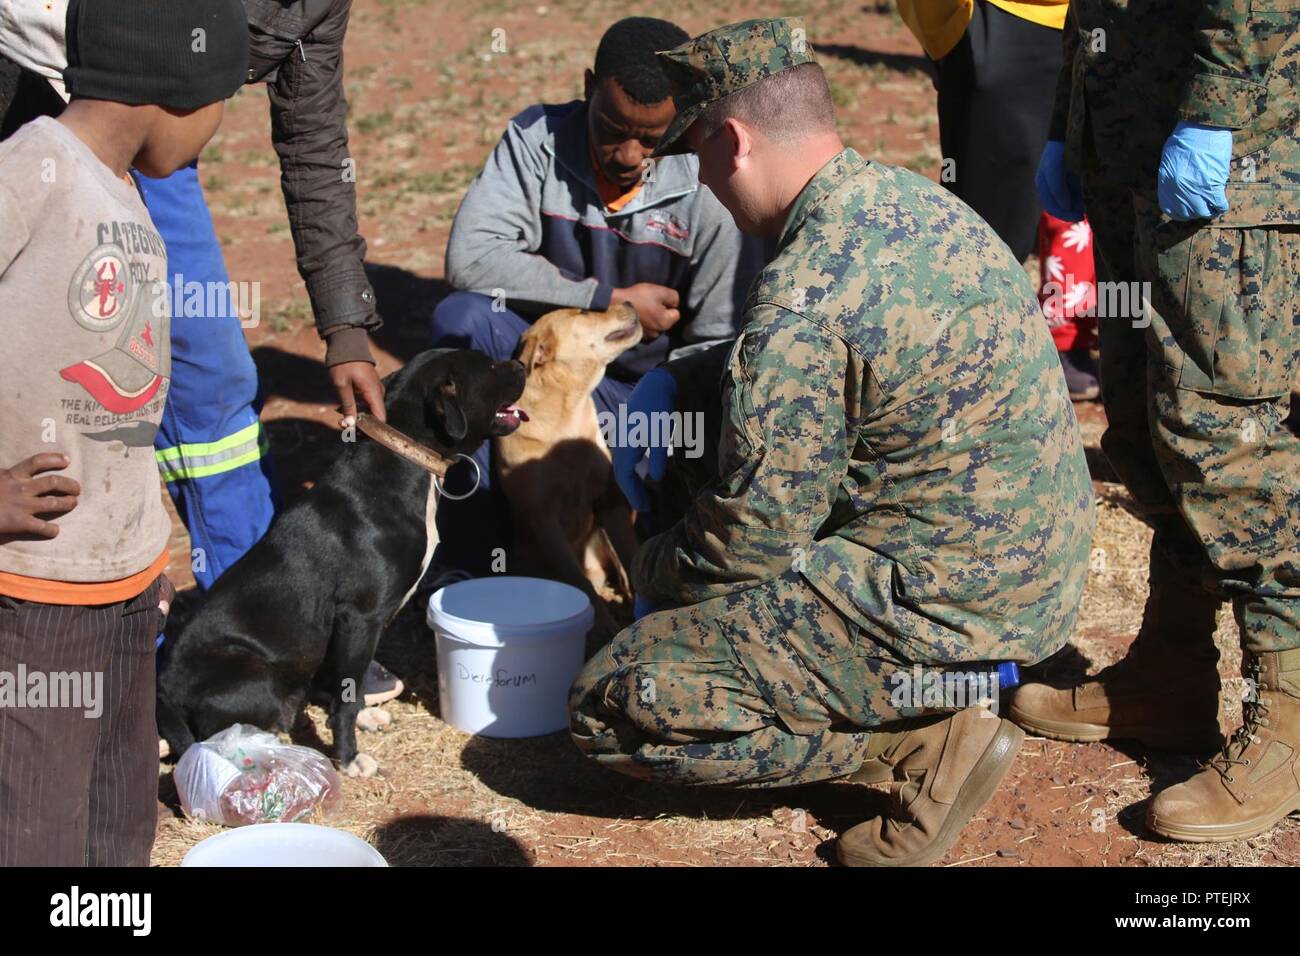 Sgt. Alex Vanlieshout, 3rd Battalion, 25th Marines provides water for dogs while locals wait for free veterinary care during Mandela Day as part of Exercise Shared Accord 17 (SA17) in Postmasburg, South Africa, July 18, 2017. Mandela Day commemorates the lifetime of service Nelson Mandela gave to South Africa and the world, taking place every year on his birthday, with this years theme being, “action against poverty.” Stock Photo